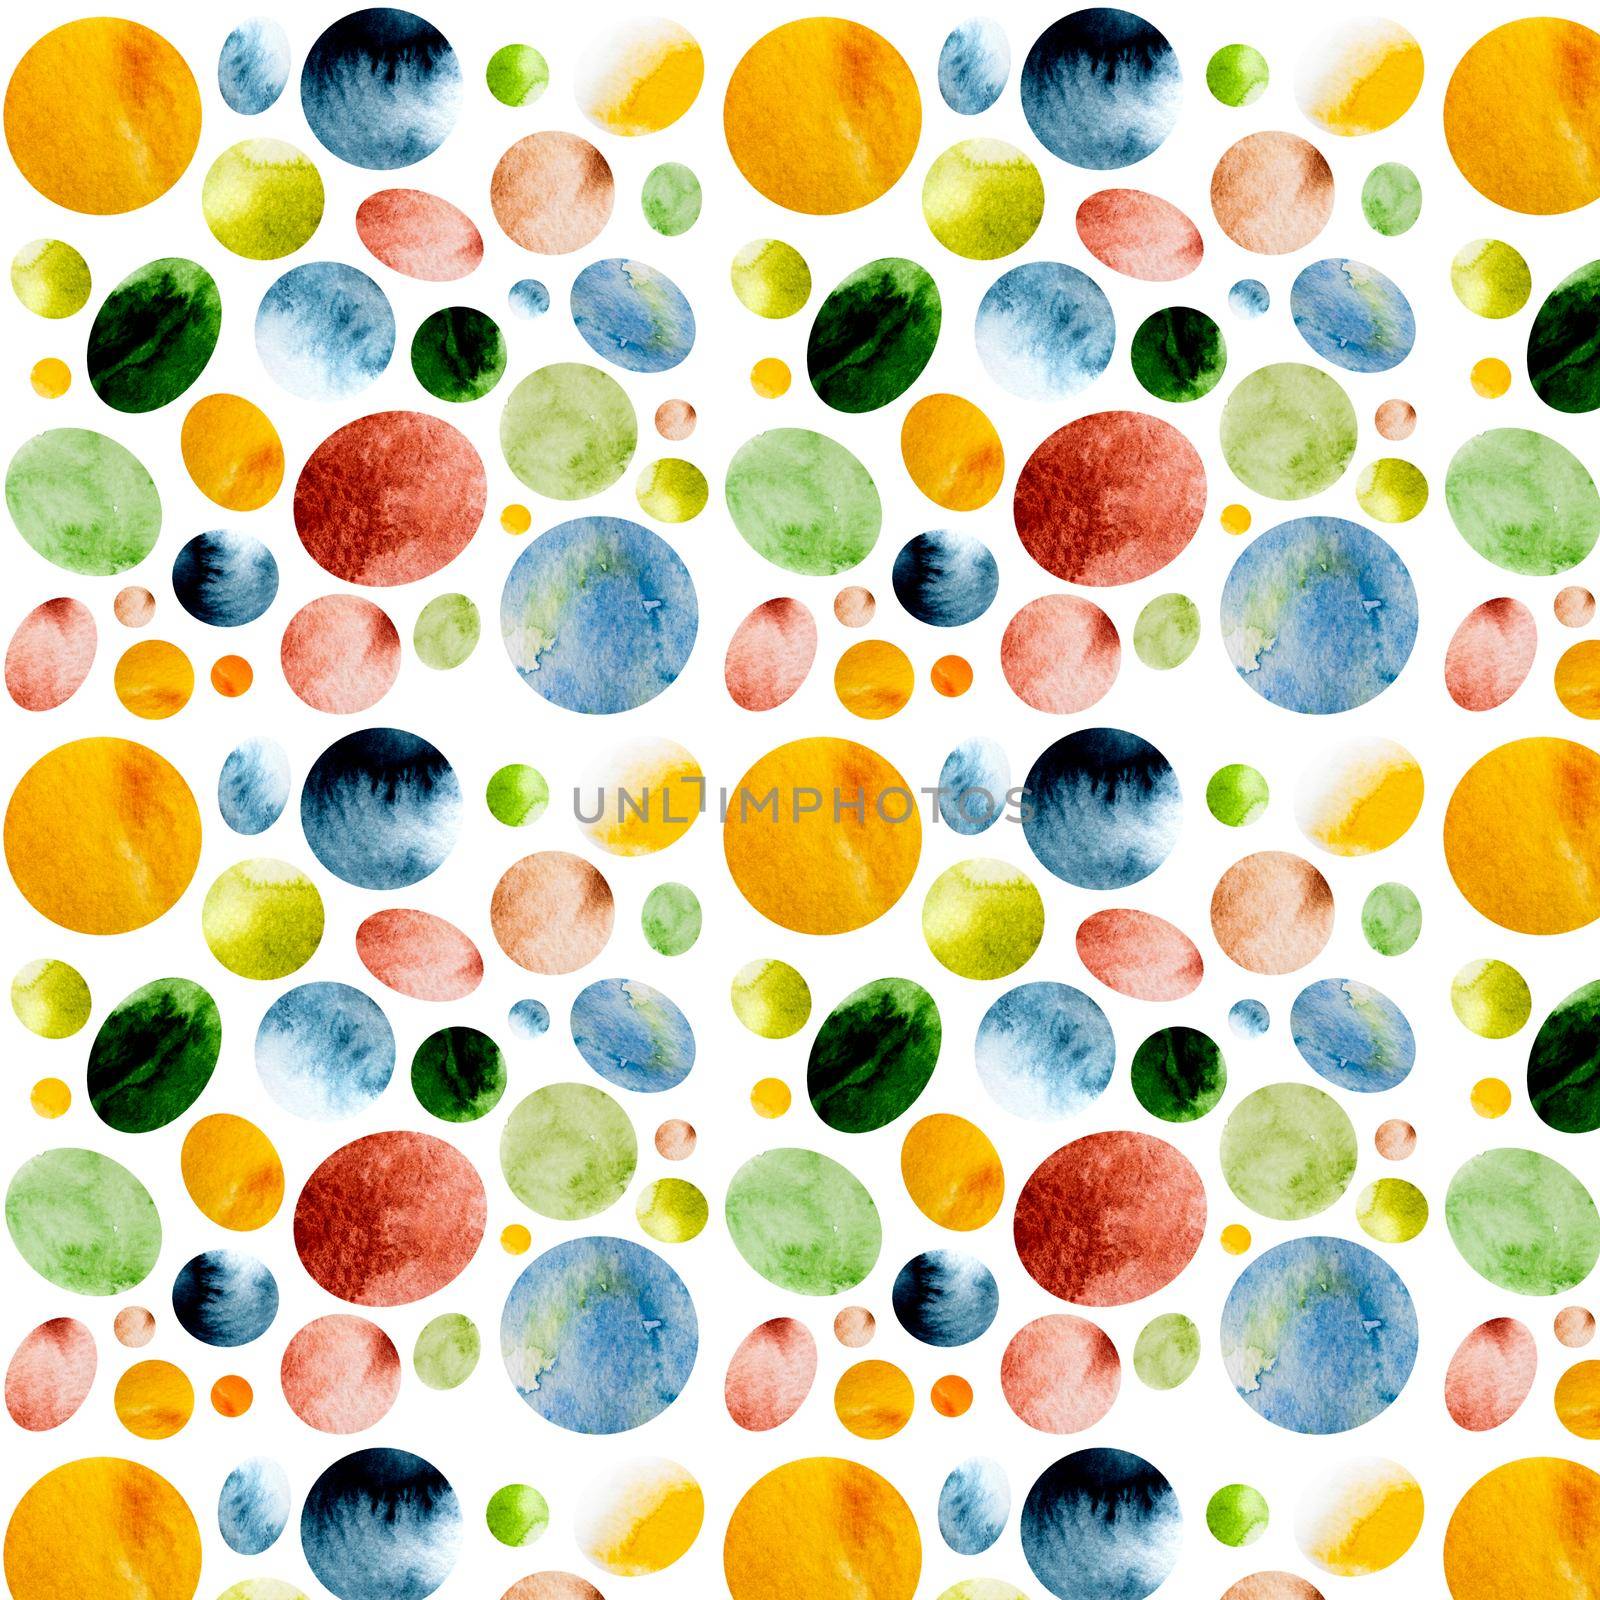 Watercolor seamless pattern. Abstract art paintings with colorful spheres isolated on white background. Aquarelle creative drawings on textured paper canvas